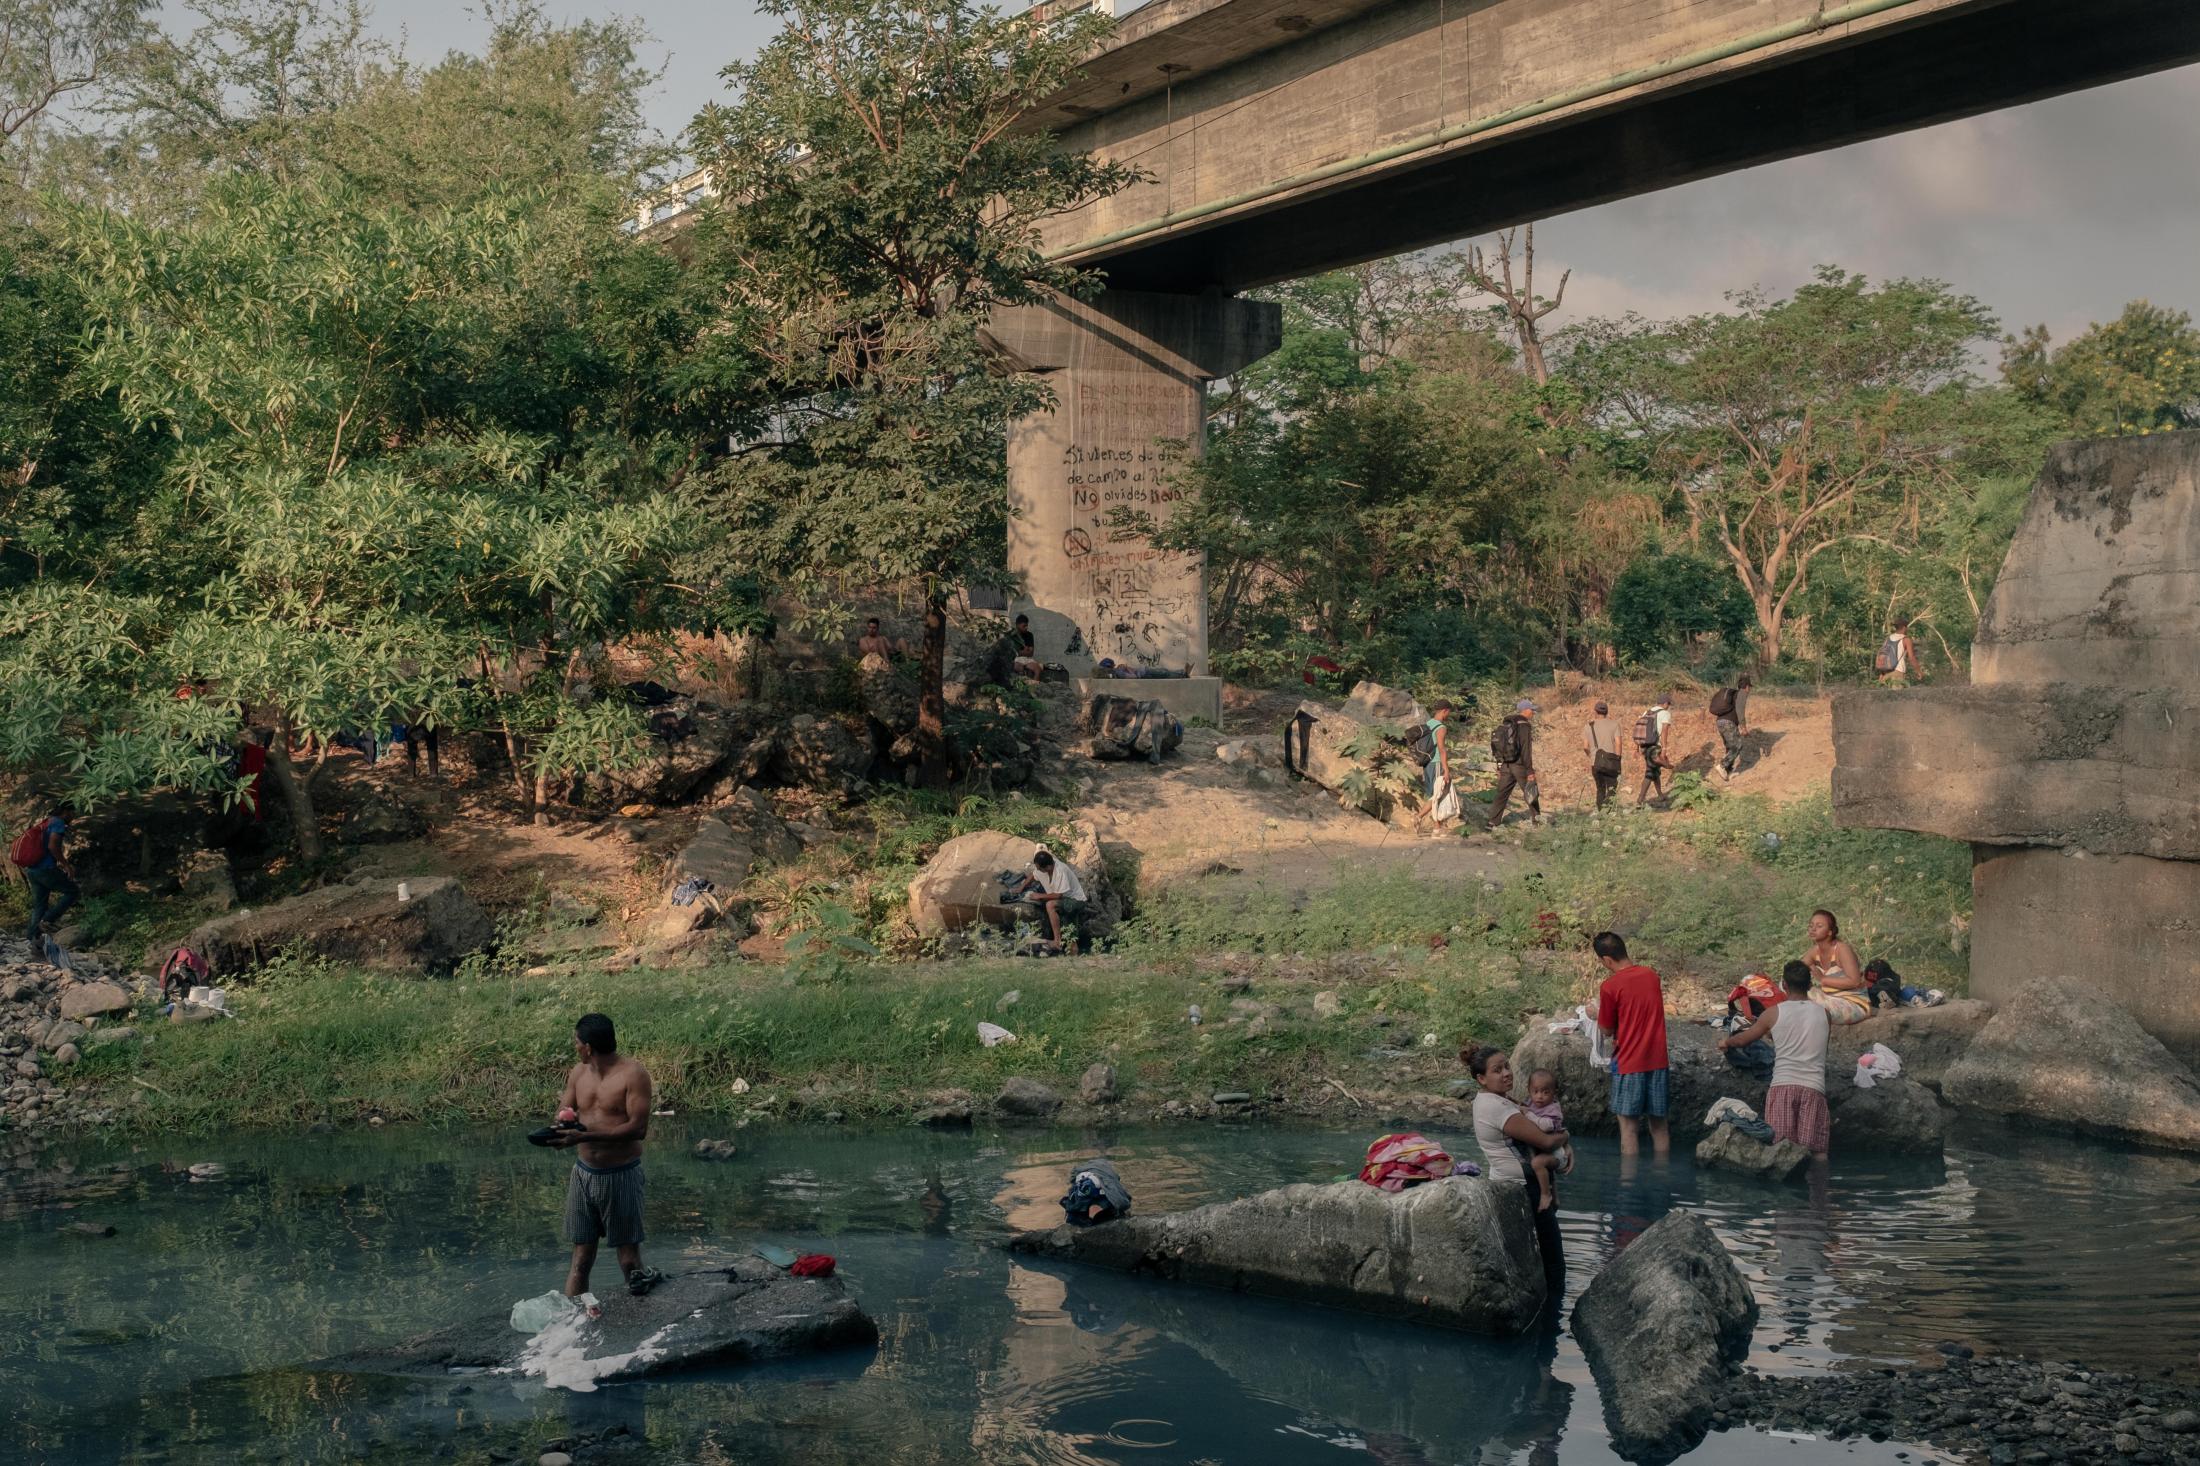 Under stifling heat, the members of the caravan decide to take a two-day break in the small village of Tapanatepec. They take the opportunity to rest, wash their clothes and bathe in the river that runs below the village. Starting on 25 March 2018 from Tapachula in southern Mexico, on the border with Guatemala, more than 1,500 migrant men, women and children take part of a month-long &quot;caravan&quot; to the Mexican city of Tijuana at the border with the United States. Organized by &quot;Pueblos sin fronteras&quot; (People without borders) this march aims at protecting migrants from the authorities but as well from the gangs and cartels that regularly prey on them when isolated. It was the first caravan of its kind set-up after Donald Trump became the 45th President of the United States. 29/03/18 San Pedro Tapanatepec, Oaxaca, Mexico.